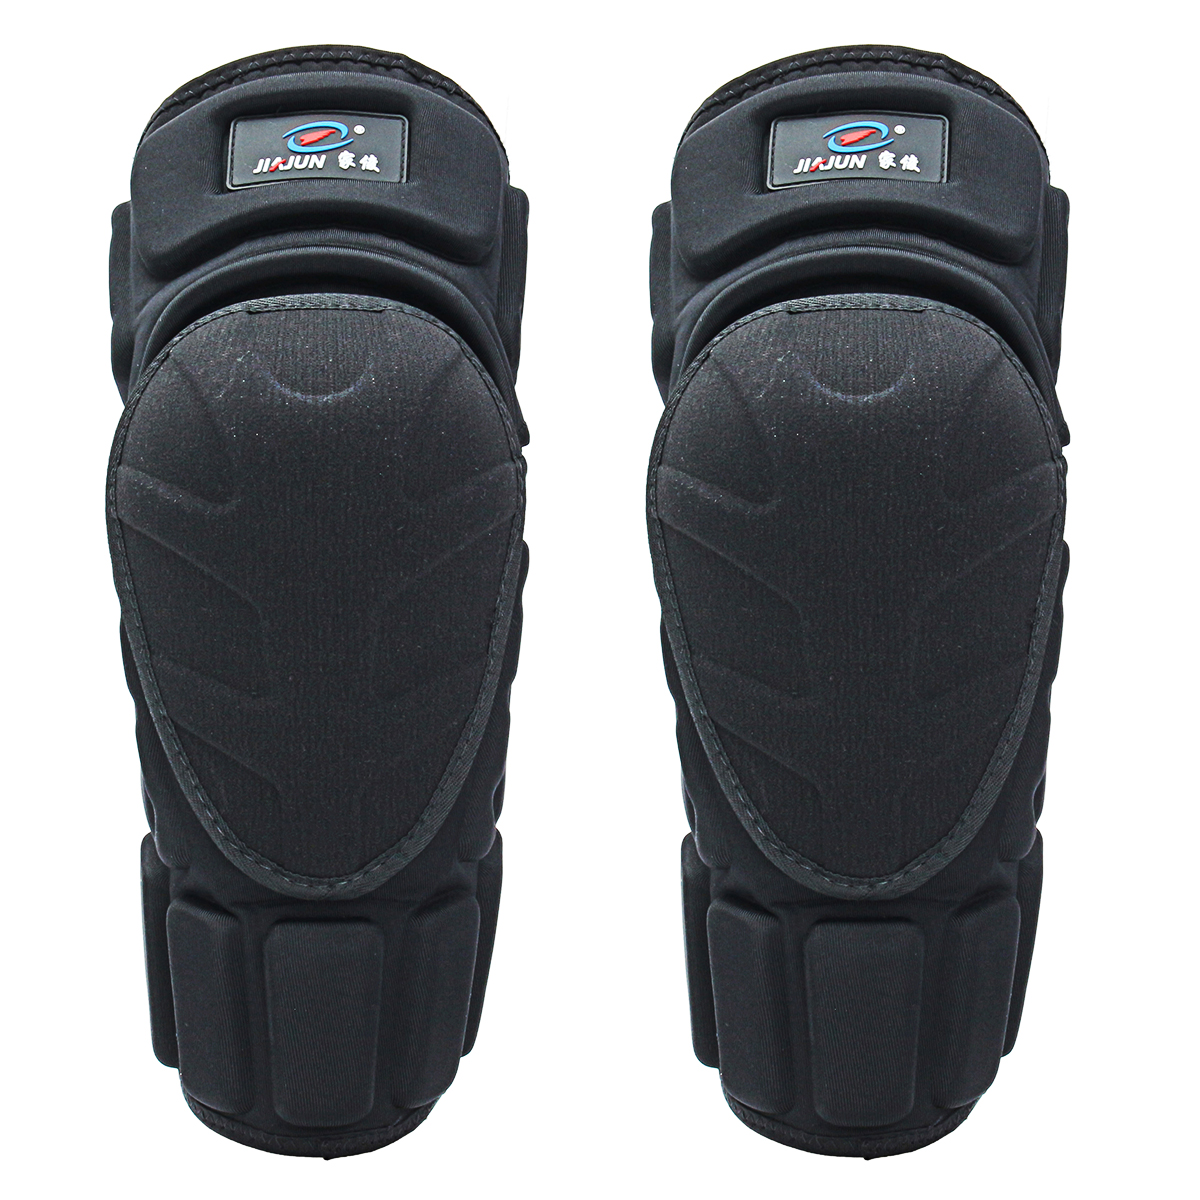 1-Pair-Outdoor-Moto-Knee-Pad-Motorcycle-Bicycle-Black-Protector-Pads-Knee-Protective-Guards-1281422-2